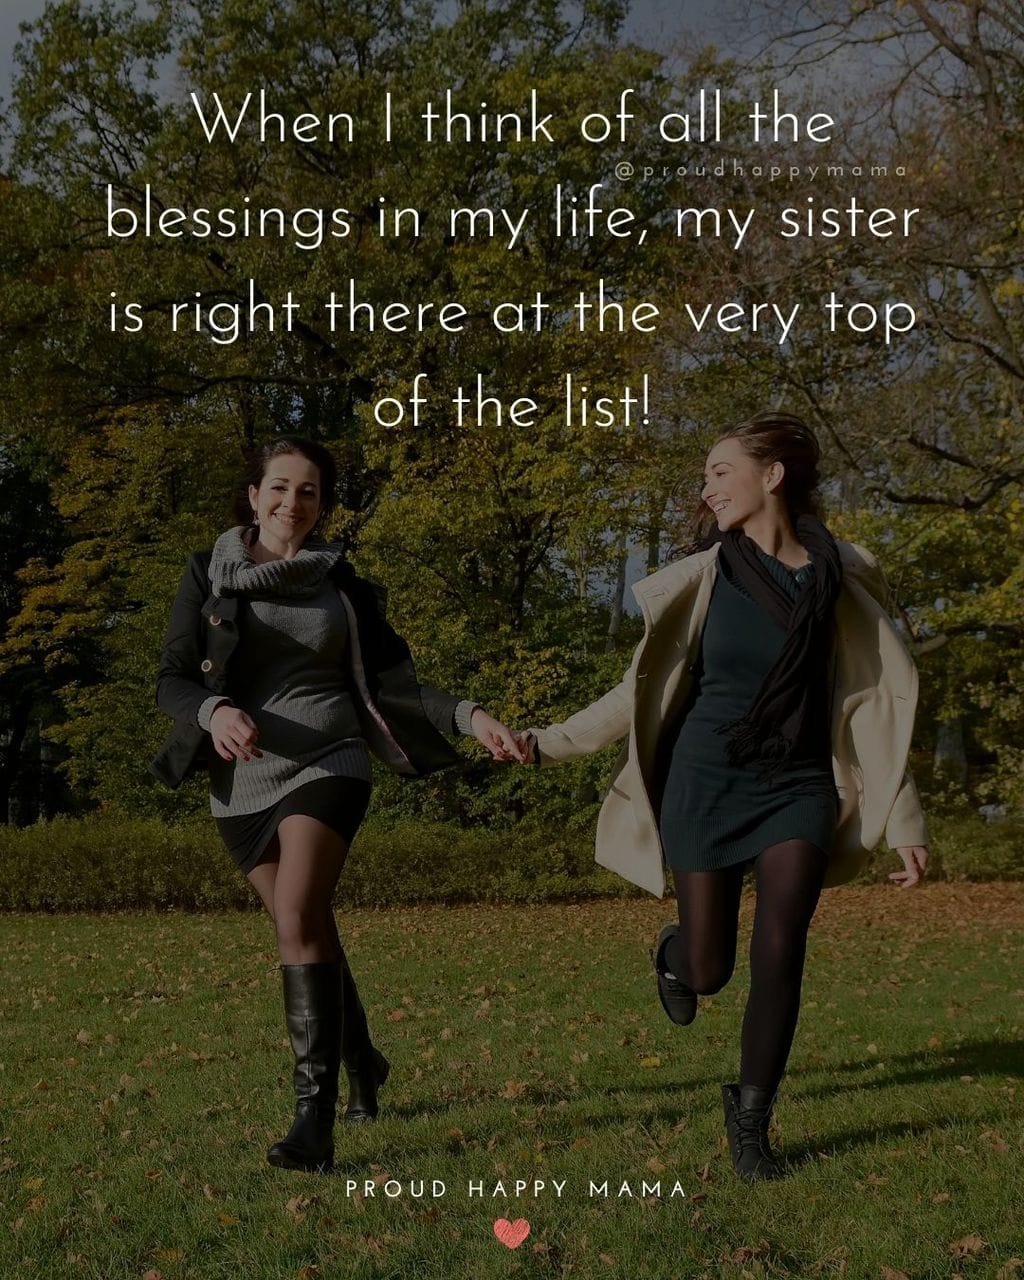 Sister Quotes - When I think of all the blessings in my life, my sister is right there at the very top of the list